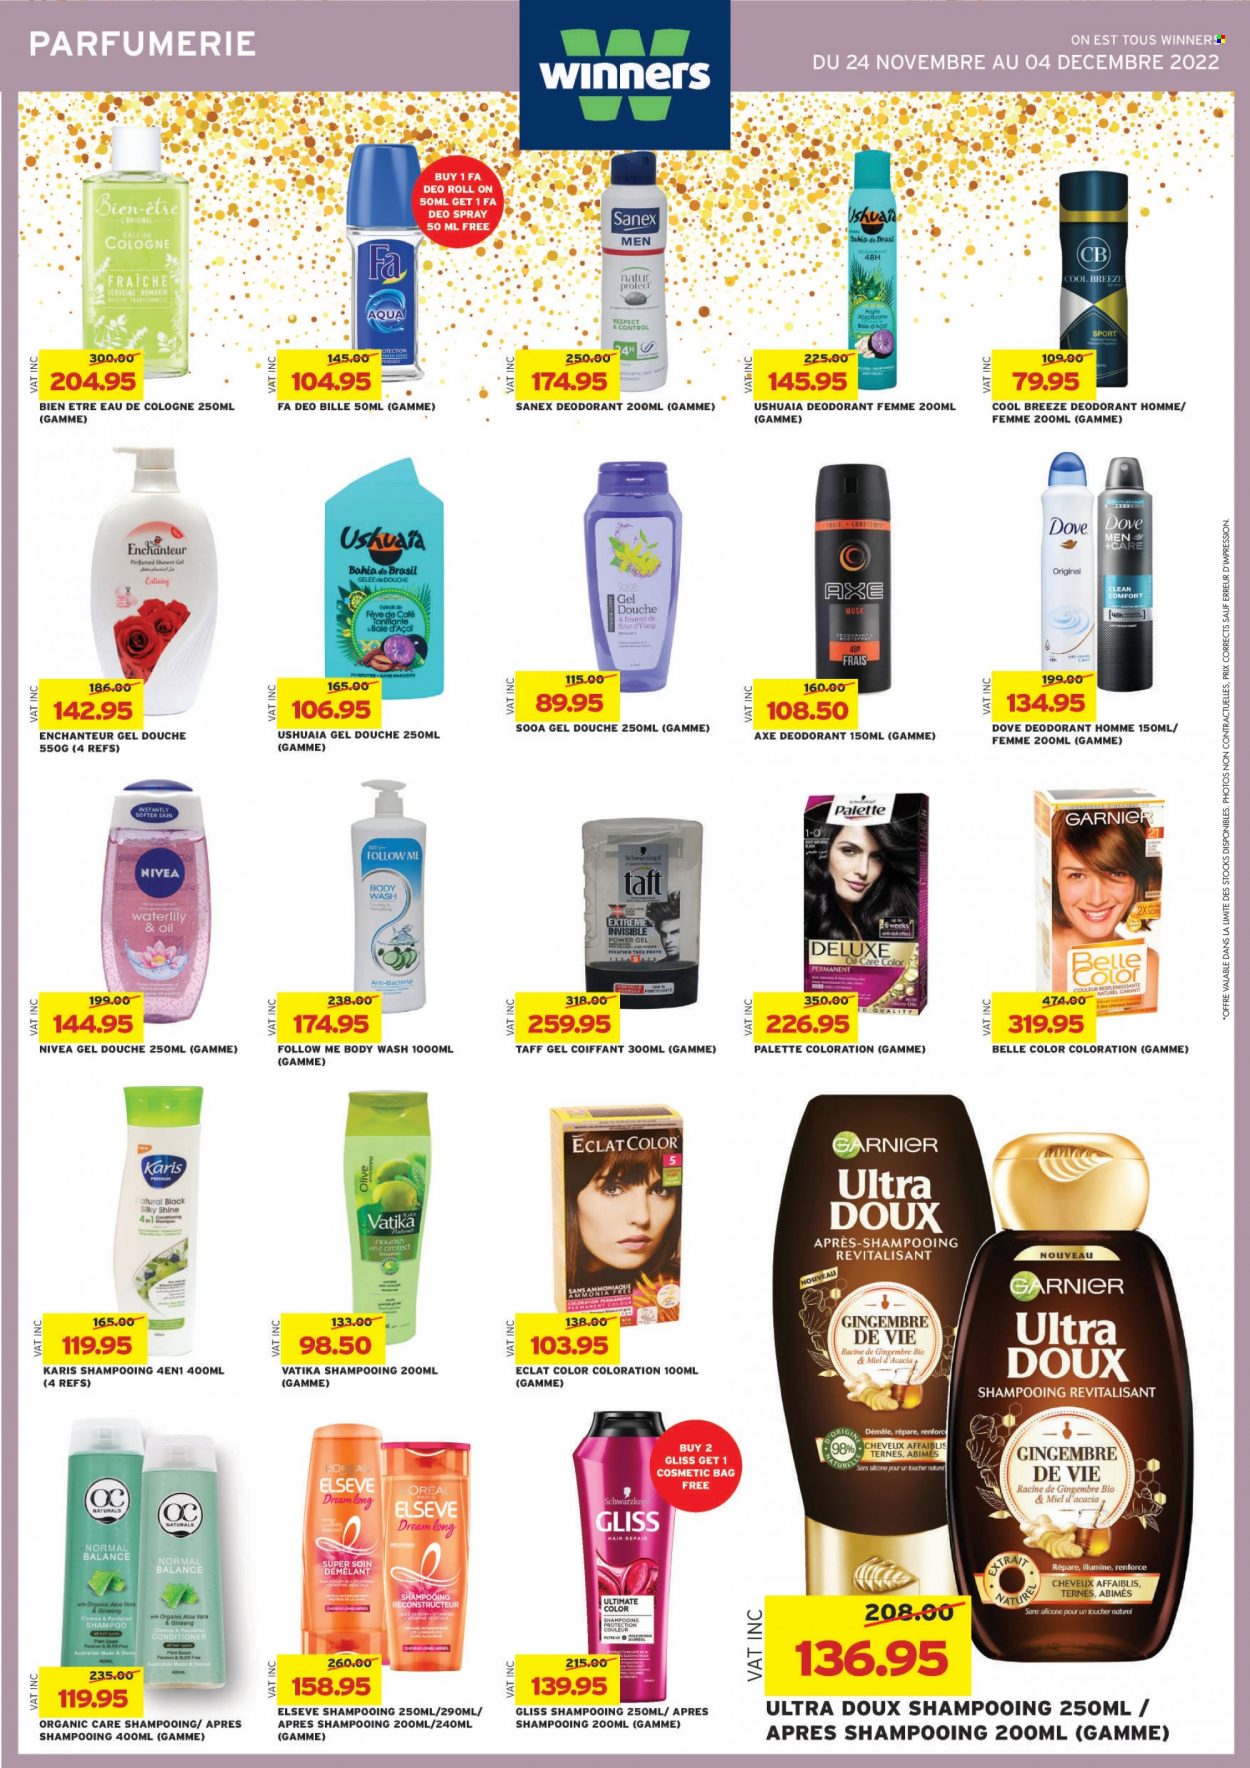 thumbnail - Winner's Catalogue - 24.11.2022 - 4.12.2022 - Sales products - Dove, oil, Nivea, body wash, shower gel, Gliss, Enchanteur, L’Oréal, conditioner, Palette, anti-perspirant, Eclat, cologne, roll-on, Follow Me, Sanex, Axe, cosmetic bag, ginseng, Garnier, shampoo, Schwarzkopf, deodorant. Page 32.